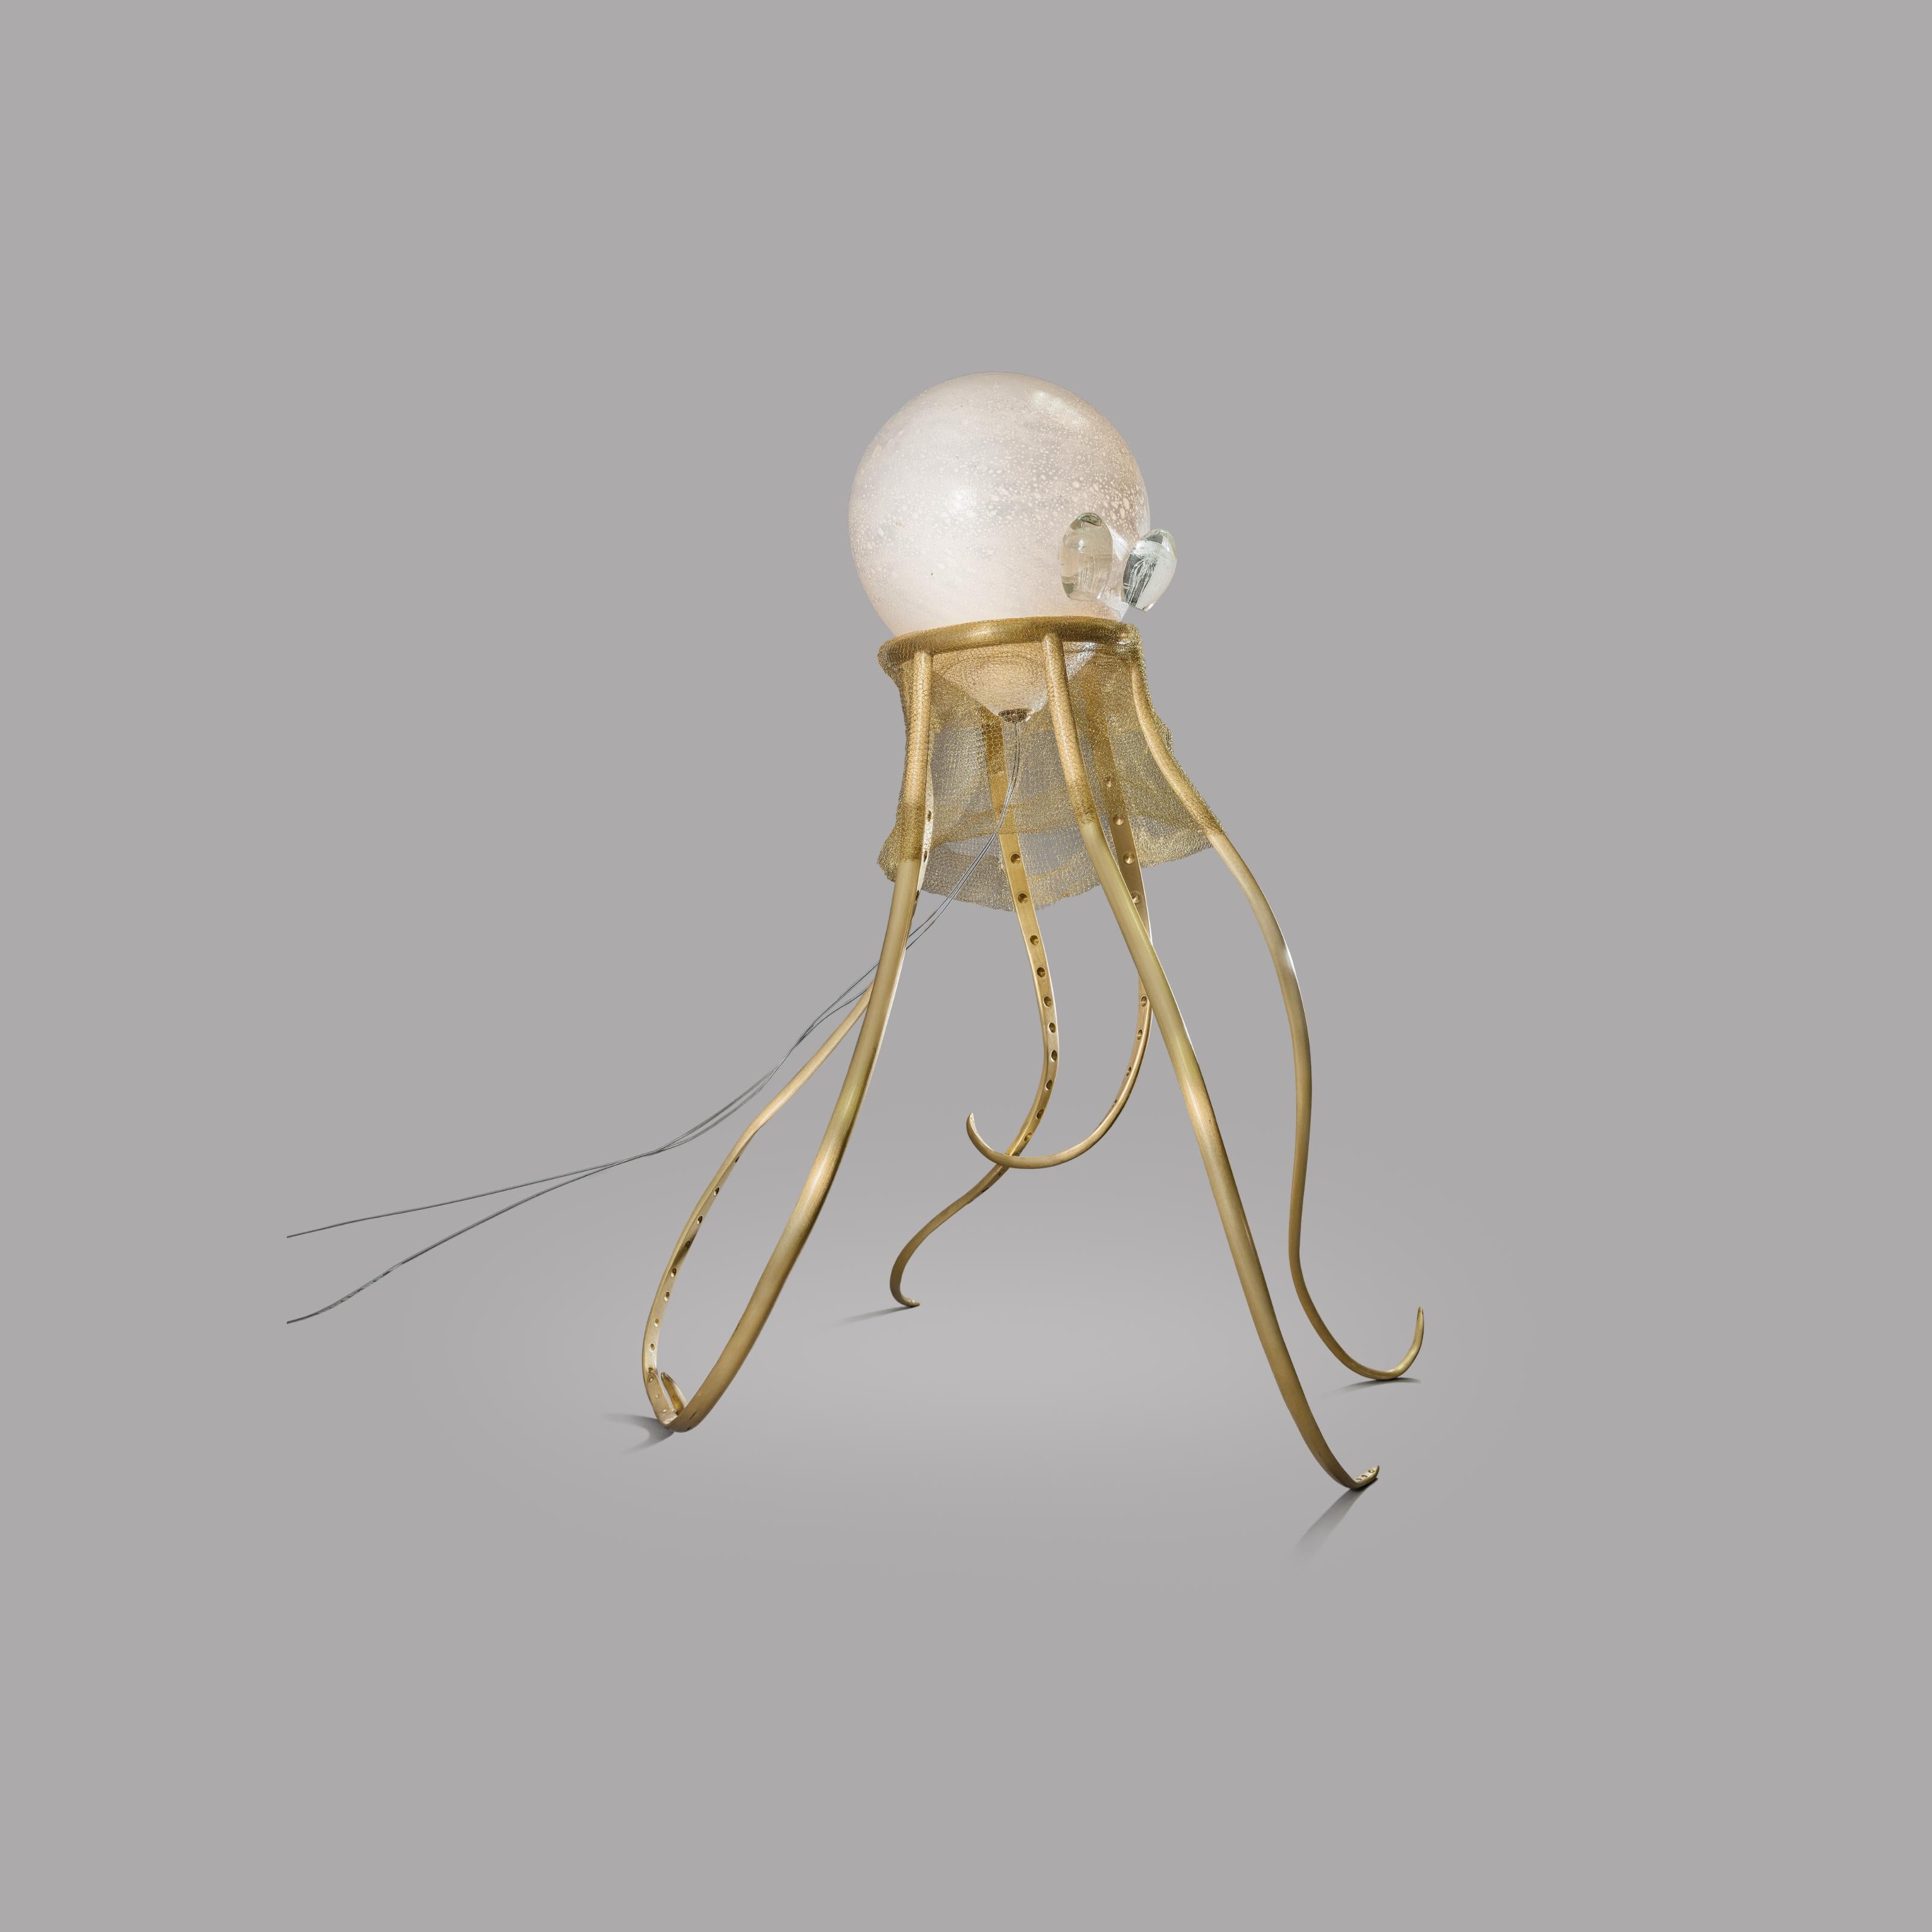 Octopus, unique floor lamp sculpture, Ludovic Clément d’Armont
Blown glass, textile, brass
Dimensions: 110 x 45 x 68 cm 

Ludovic Clément d’Armont is in the continuation of a family tradition of centuries of gentle glassmakers, painters,